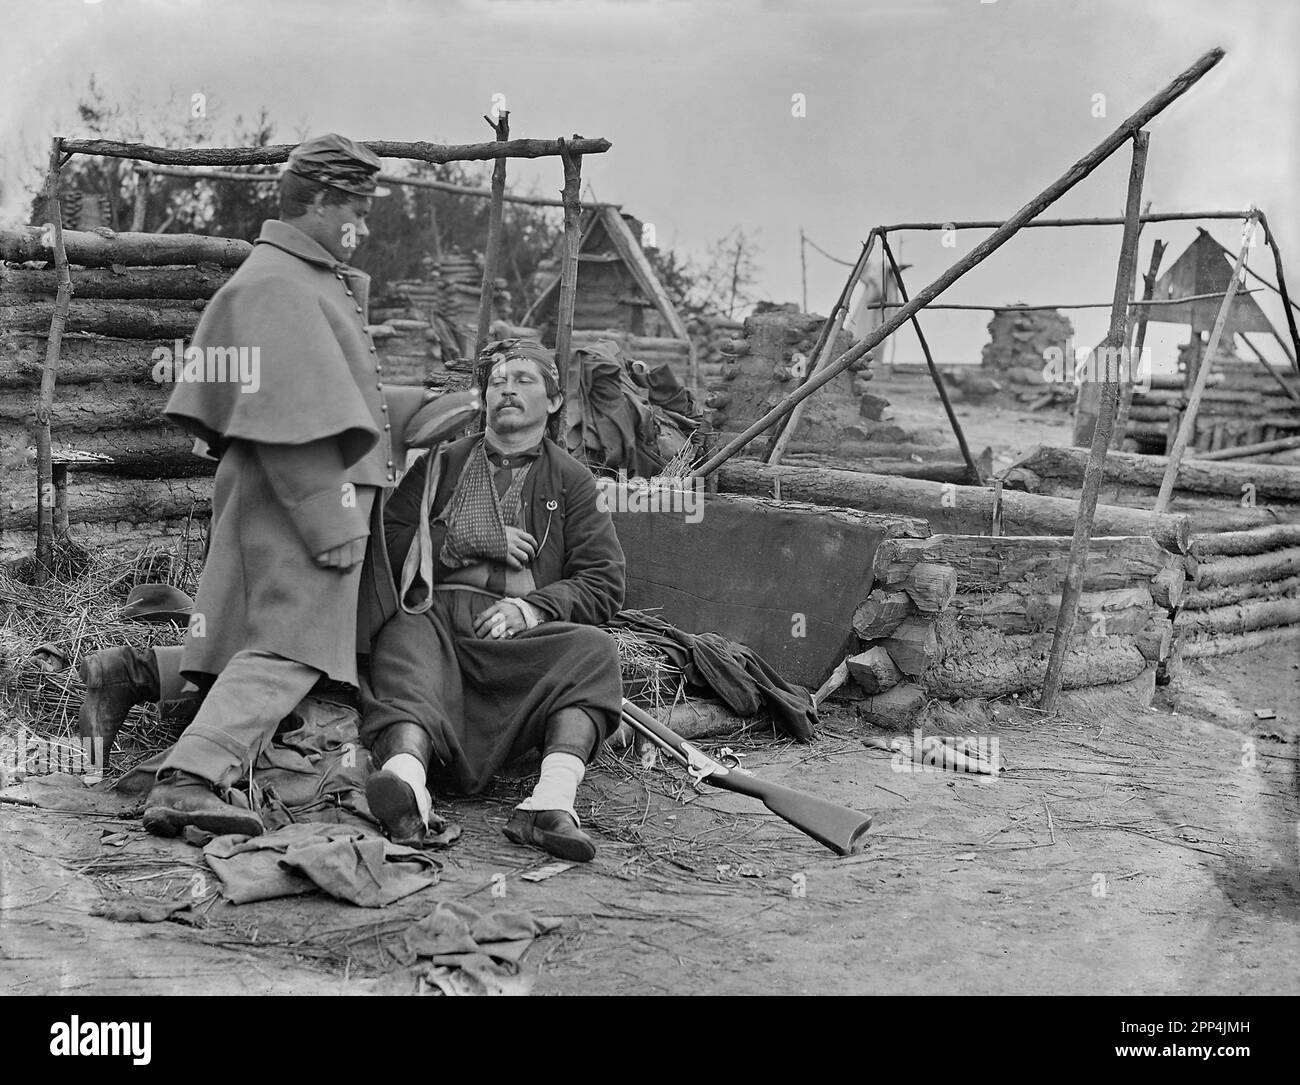 Scene showing deserted camp and wounded Zouave soldier. Circa 1860-65. The Zouave soldier is wearing a Silver Crescent and Star Badge. Stock Photo